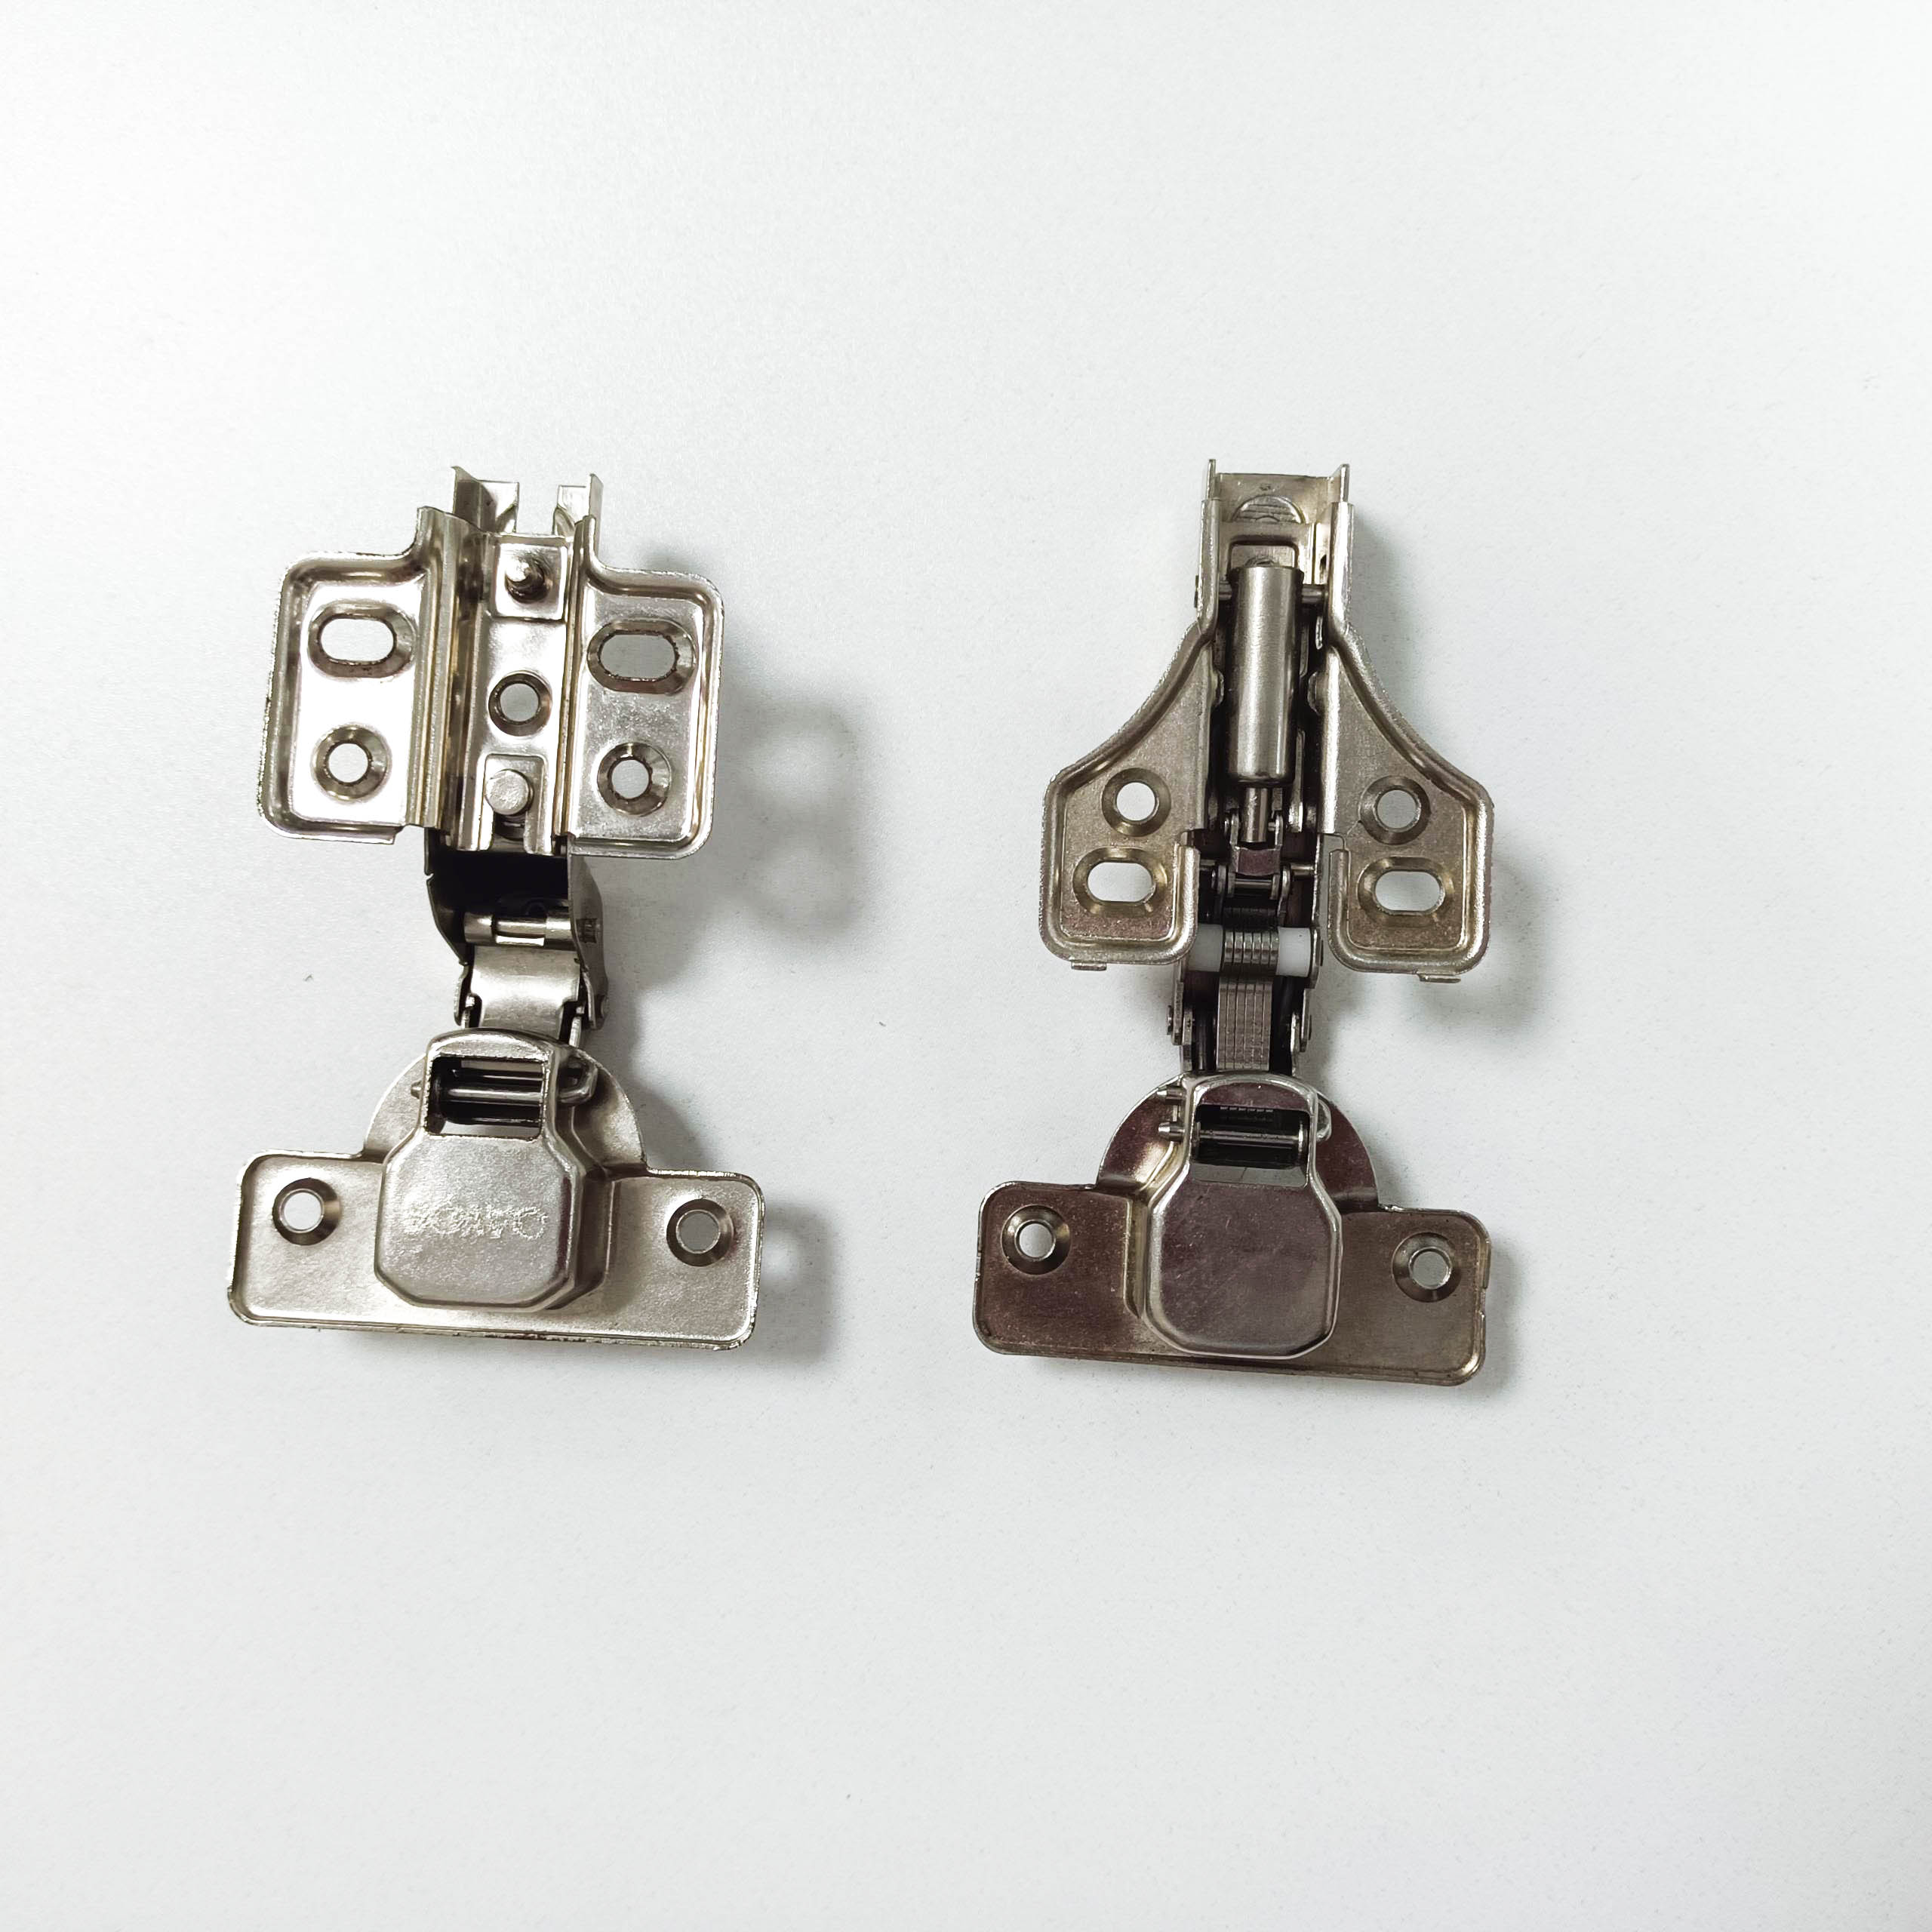 35mm Furniture Hinge Manufacturer Two Way Cabinet Hinge Hydraulic Soft Close Cabinet Hinges